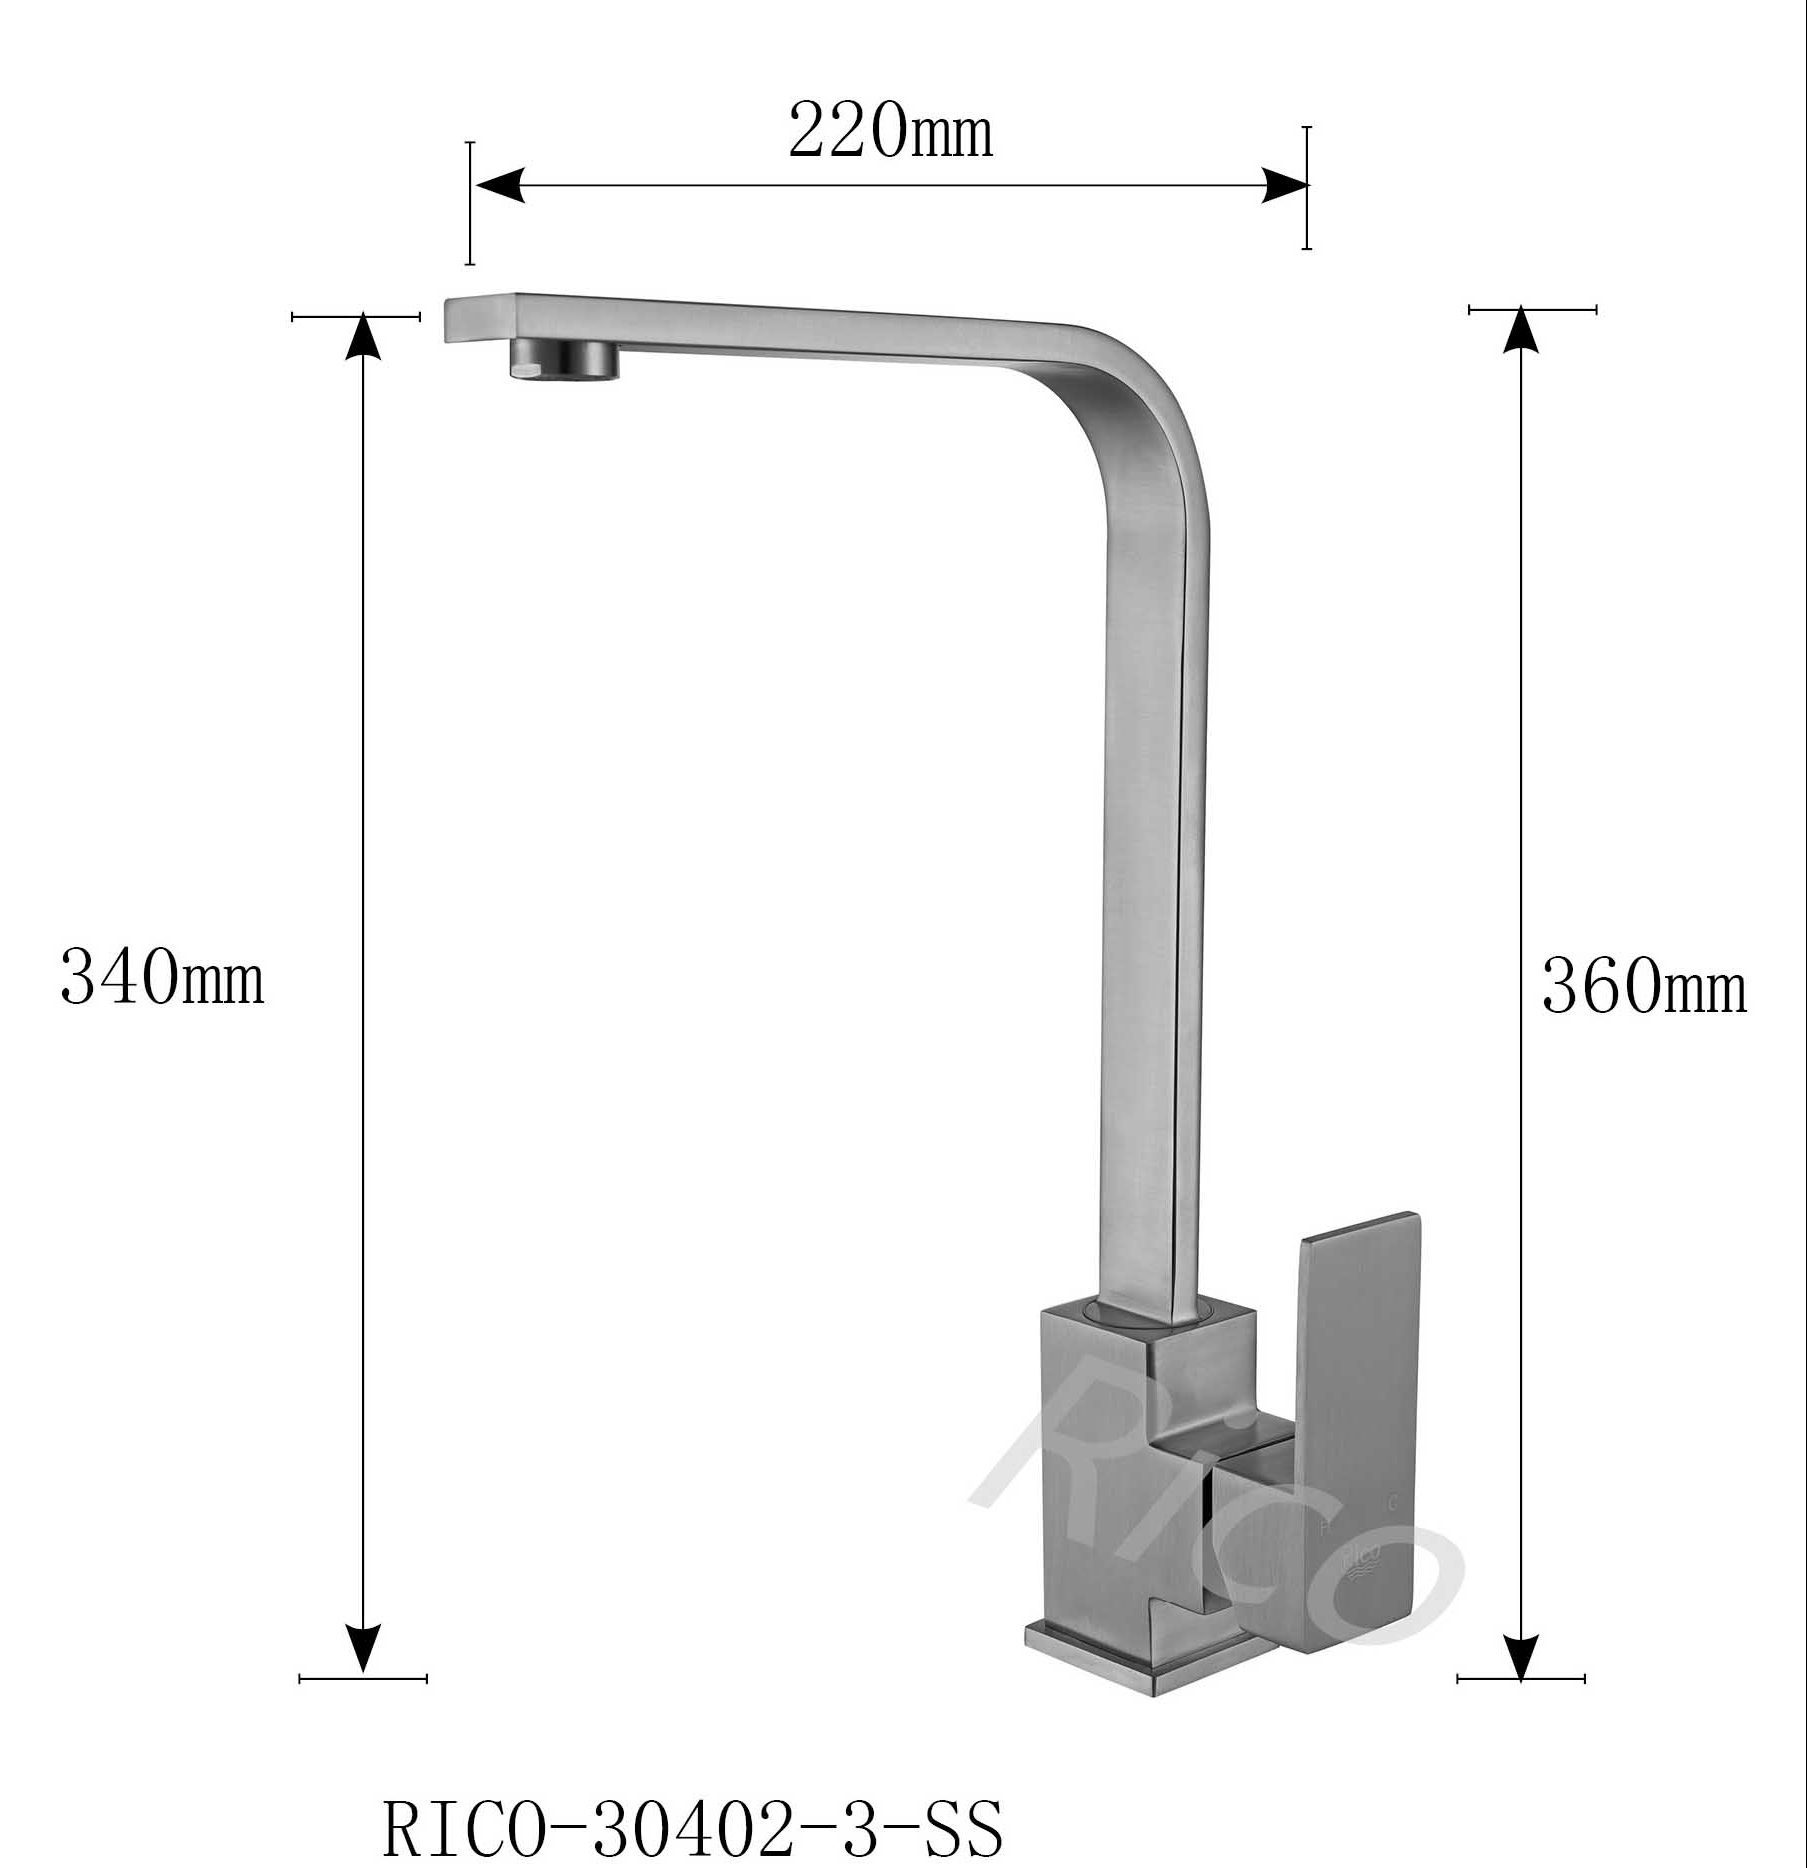 Rico : Stainless Steel Sink Mixer – RICO-30402-3-SS